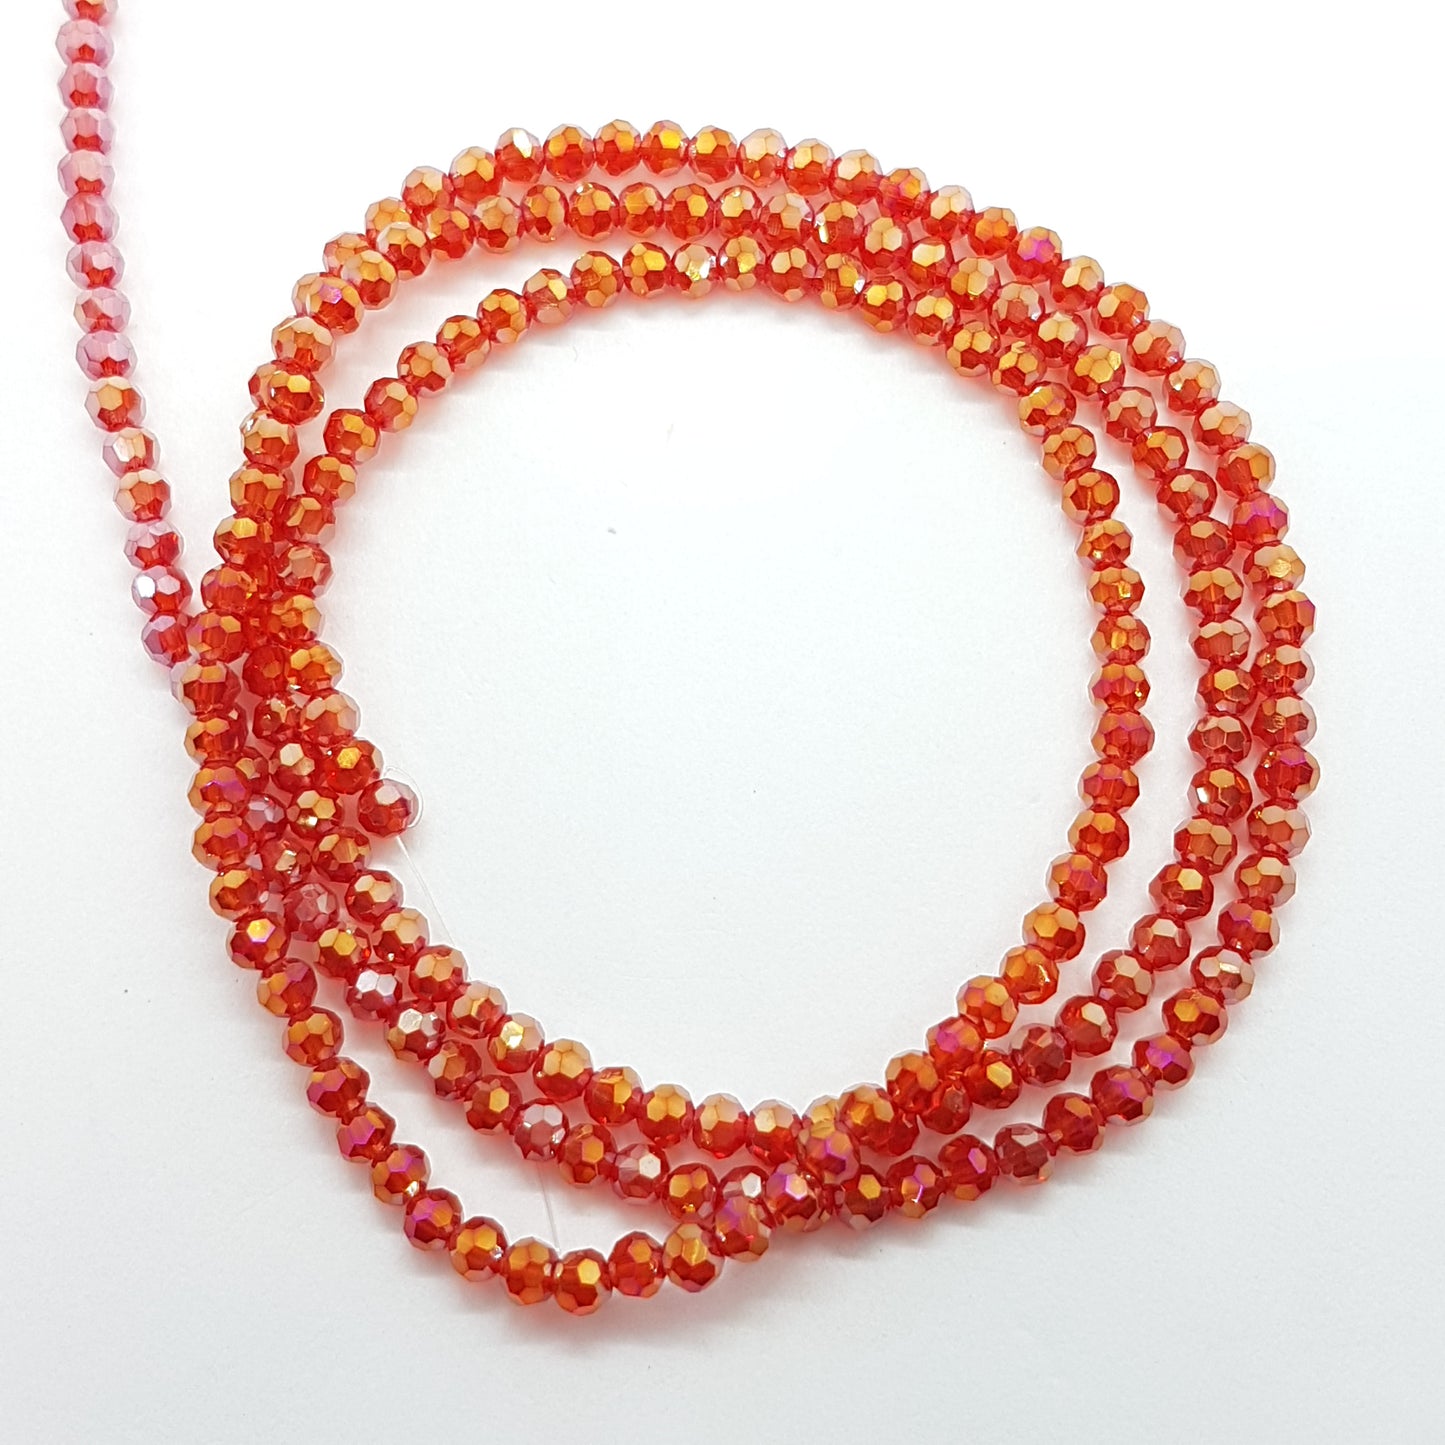 200pc Red Round Crystal Beads